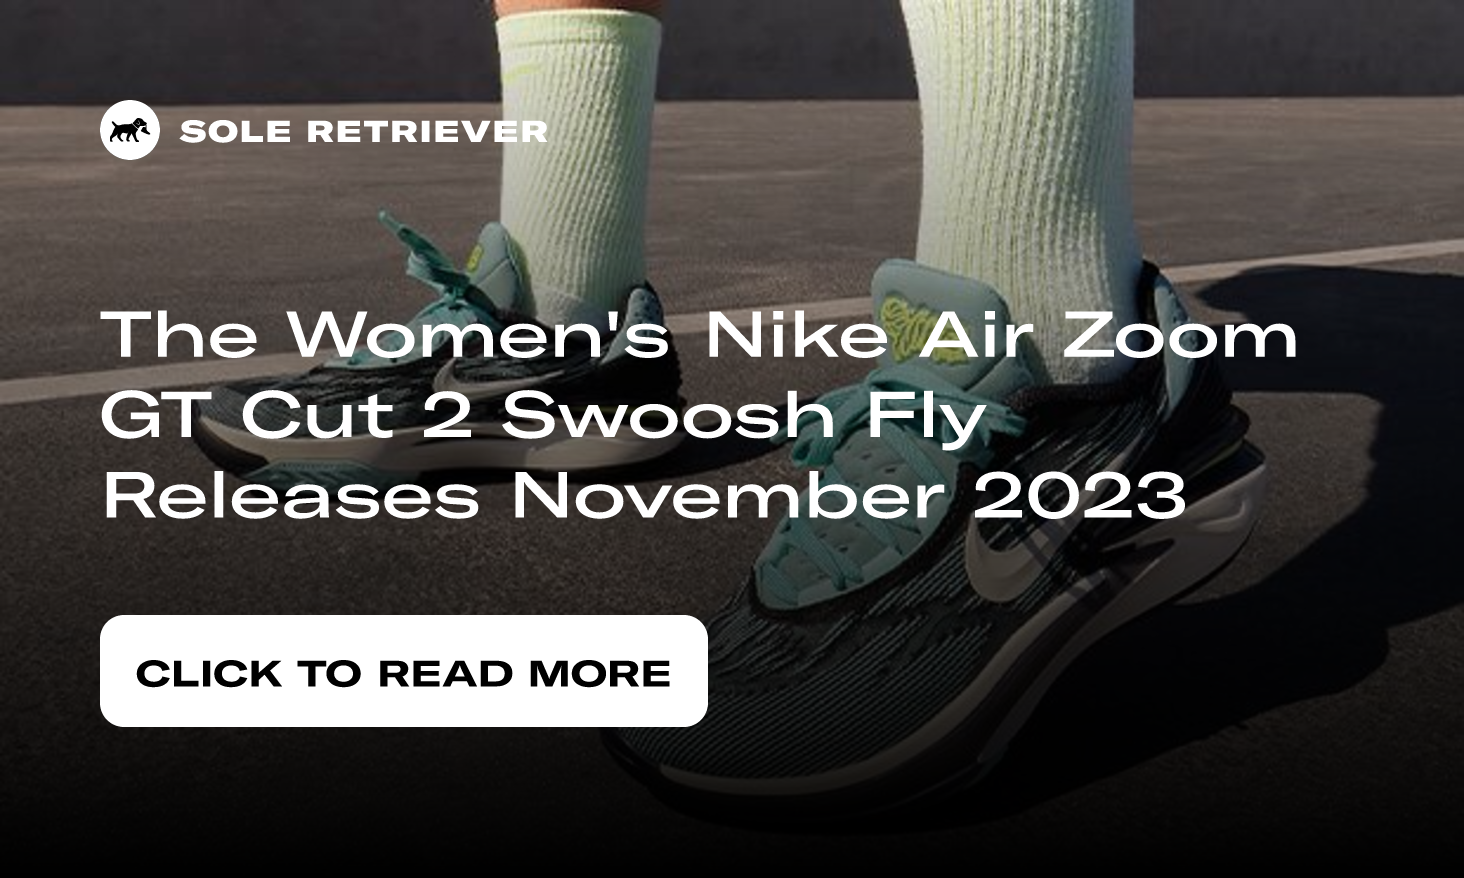 The Women's Nike Air Zoom GT Cut 2 Swoosh Fly Releases